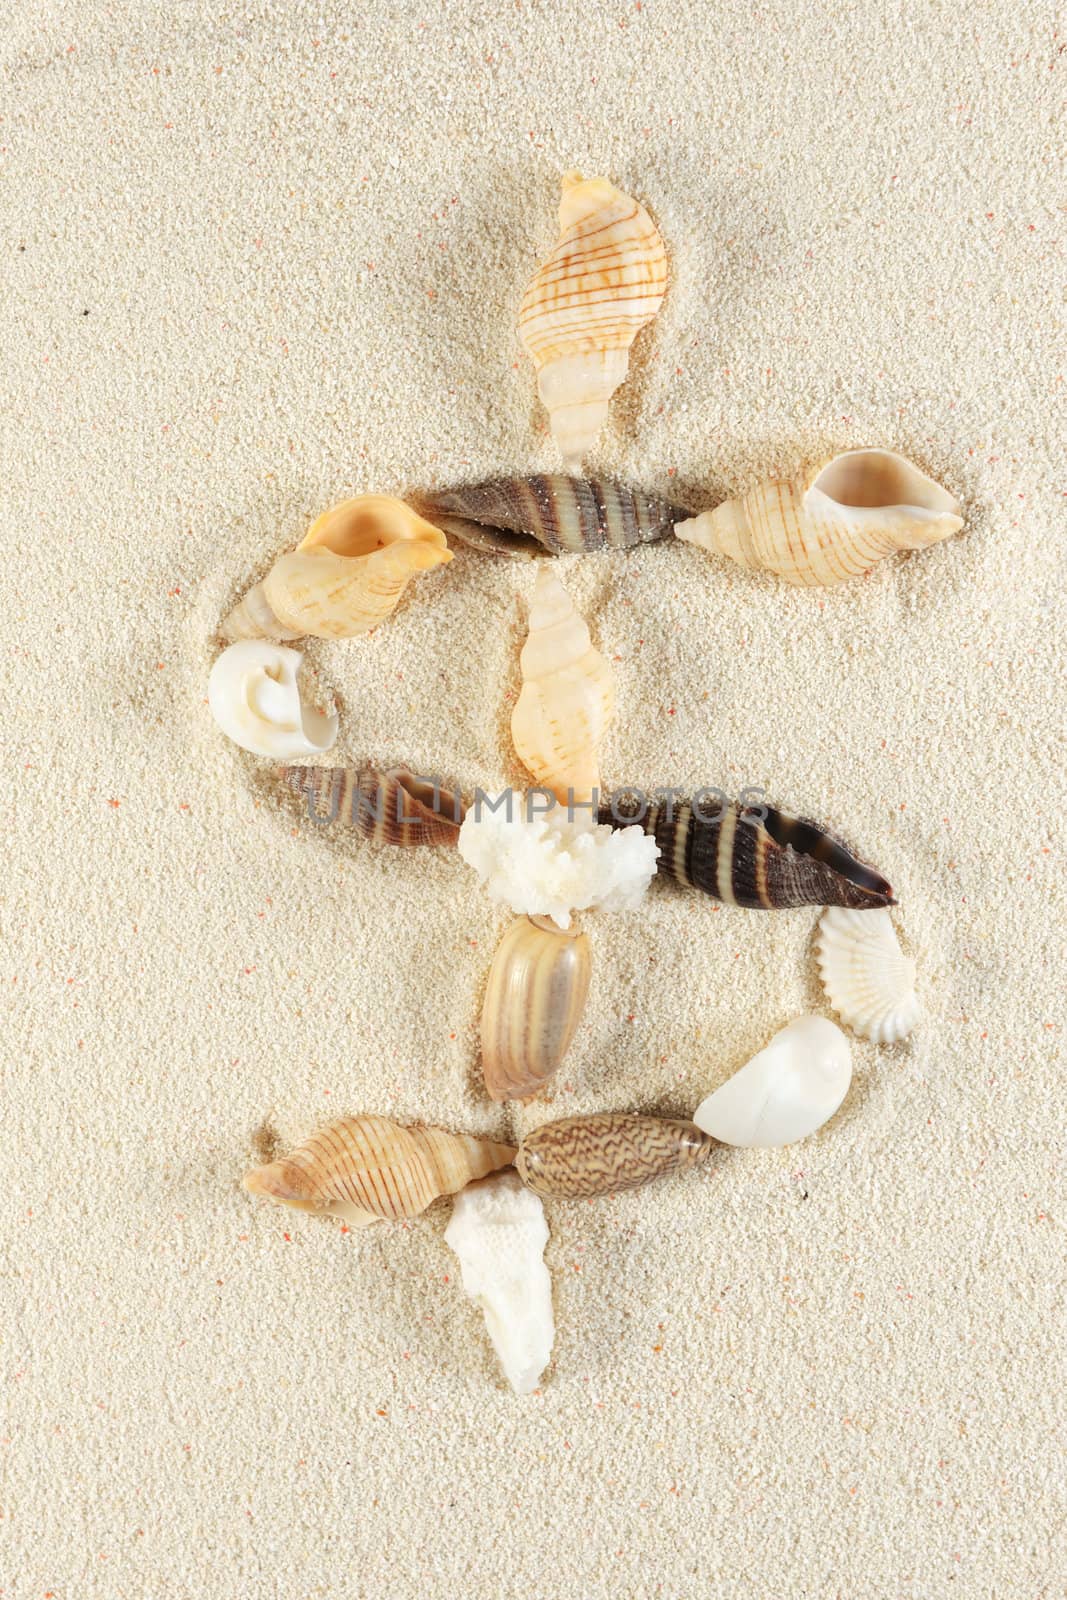 Dollar sign made of seashells group on the sand